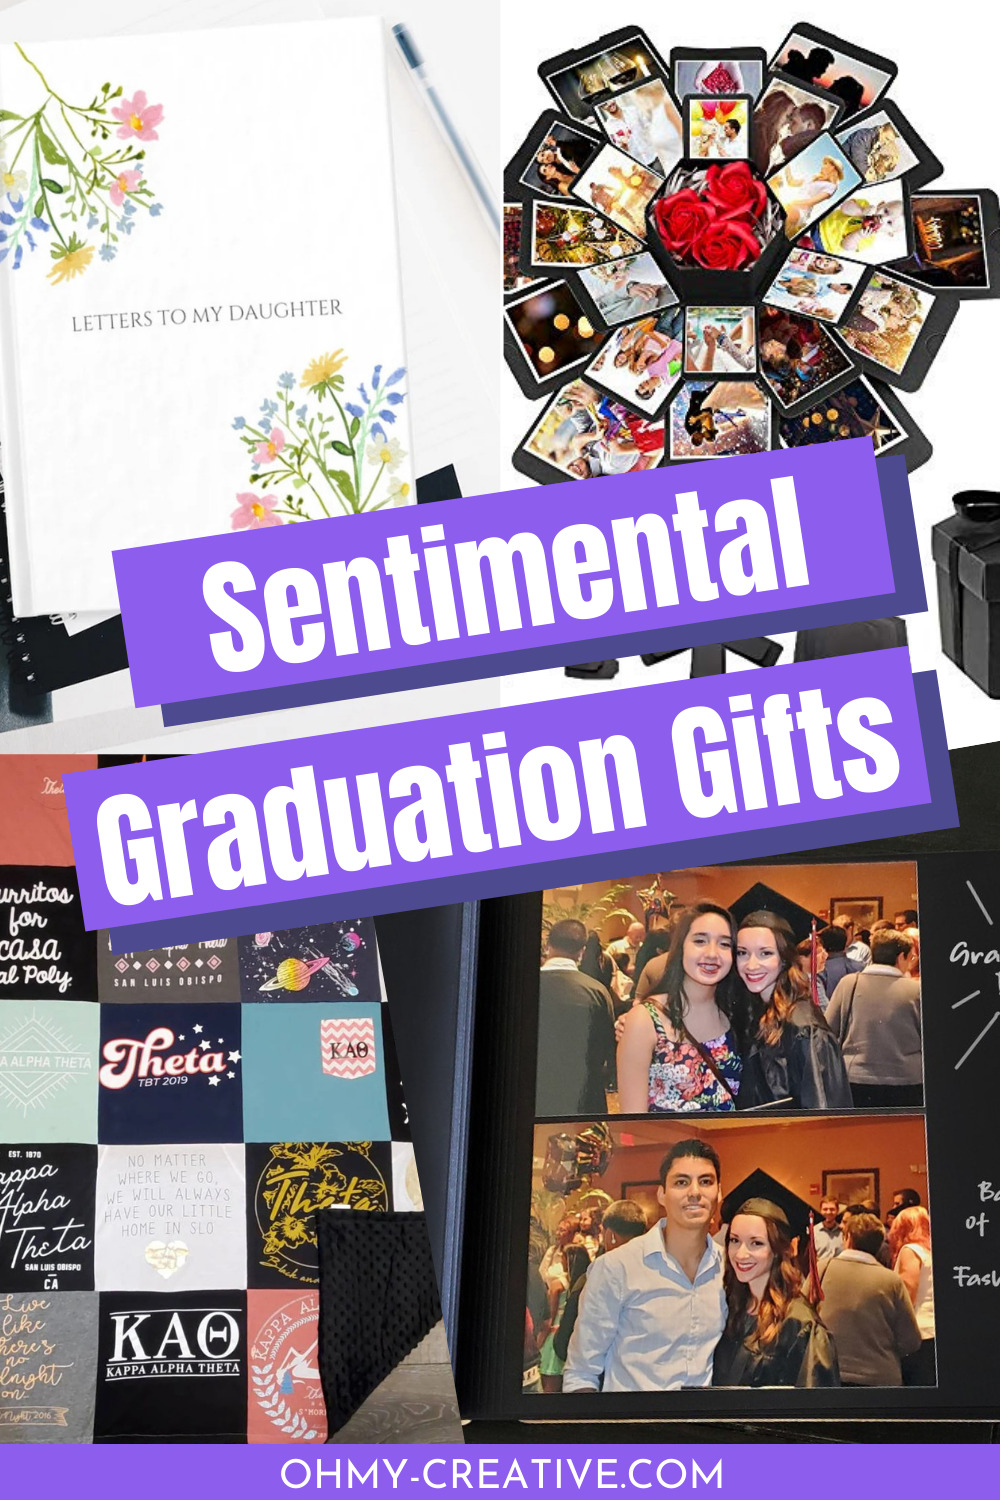 A collage of great sentimental graduation gifts including a quilt made from t-shirts, scrapbook of school photos, journals and words from mom.